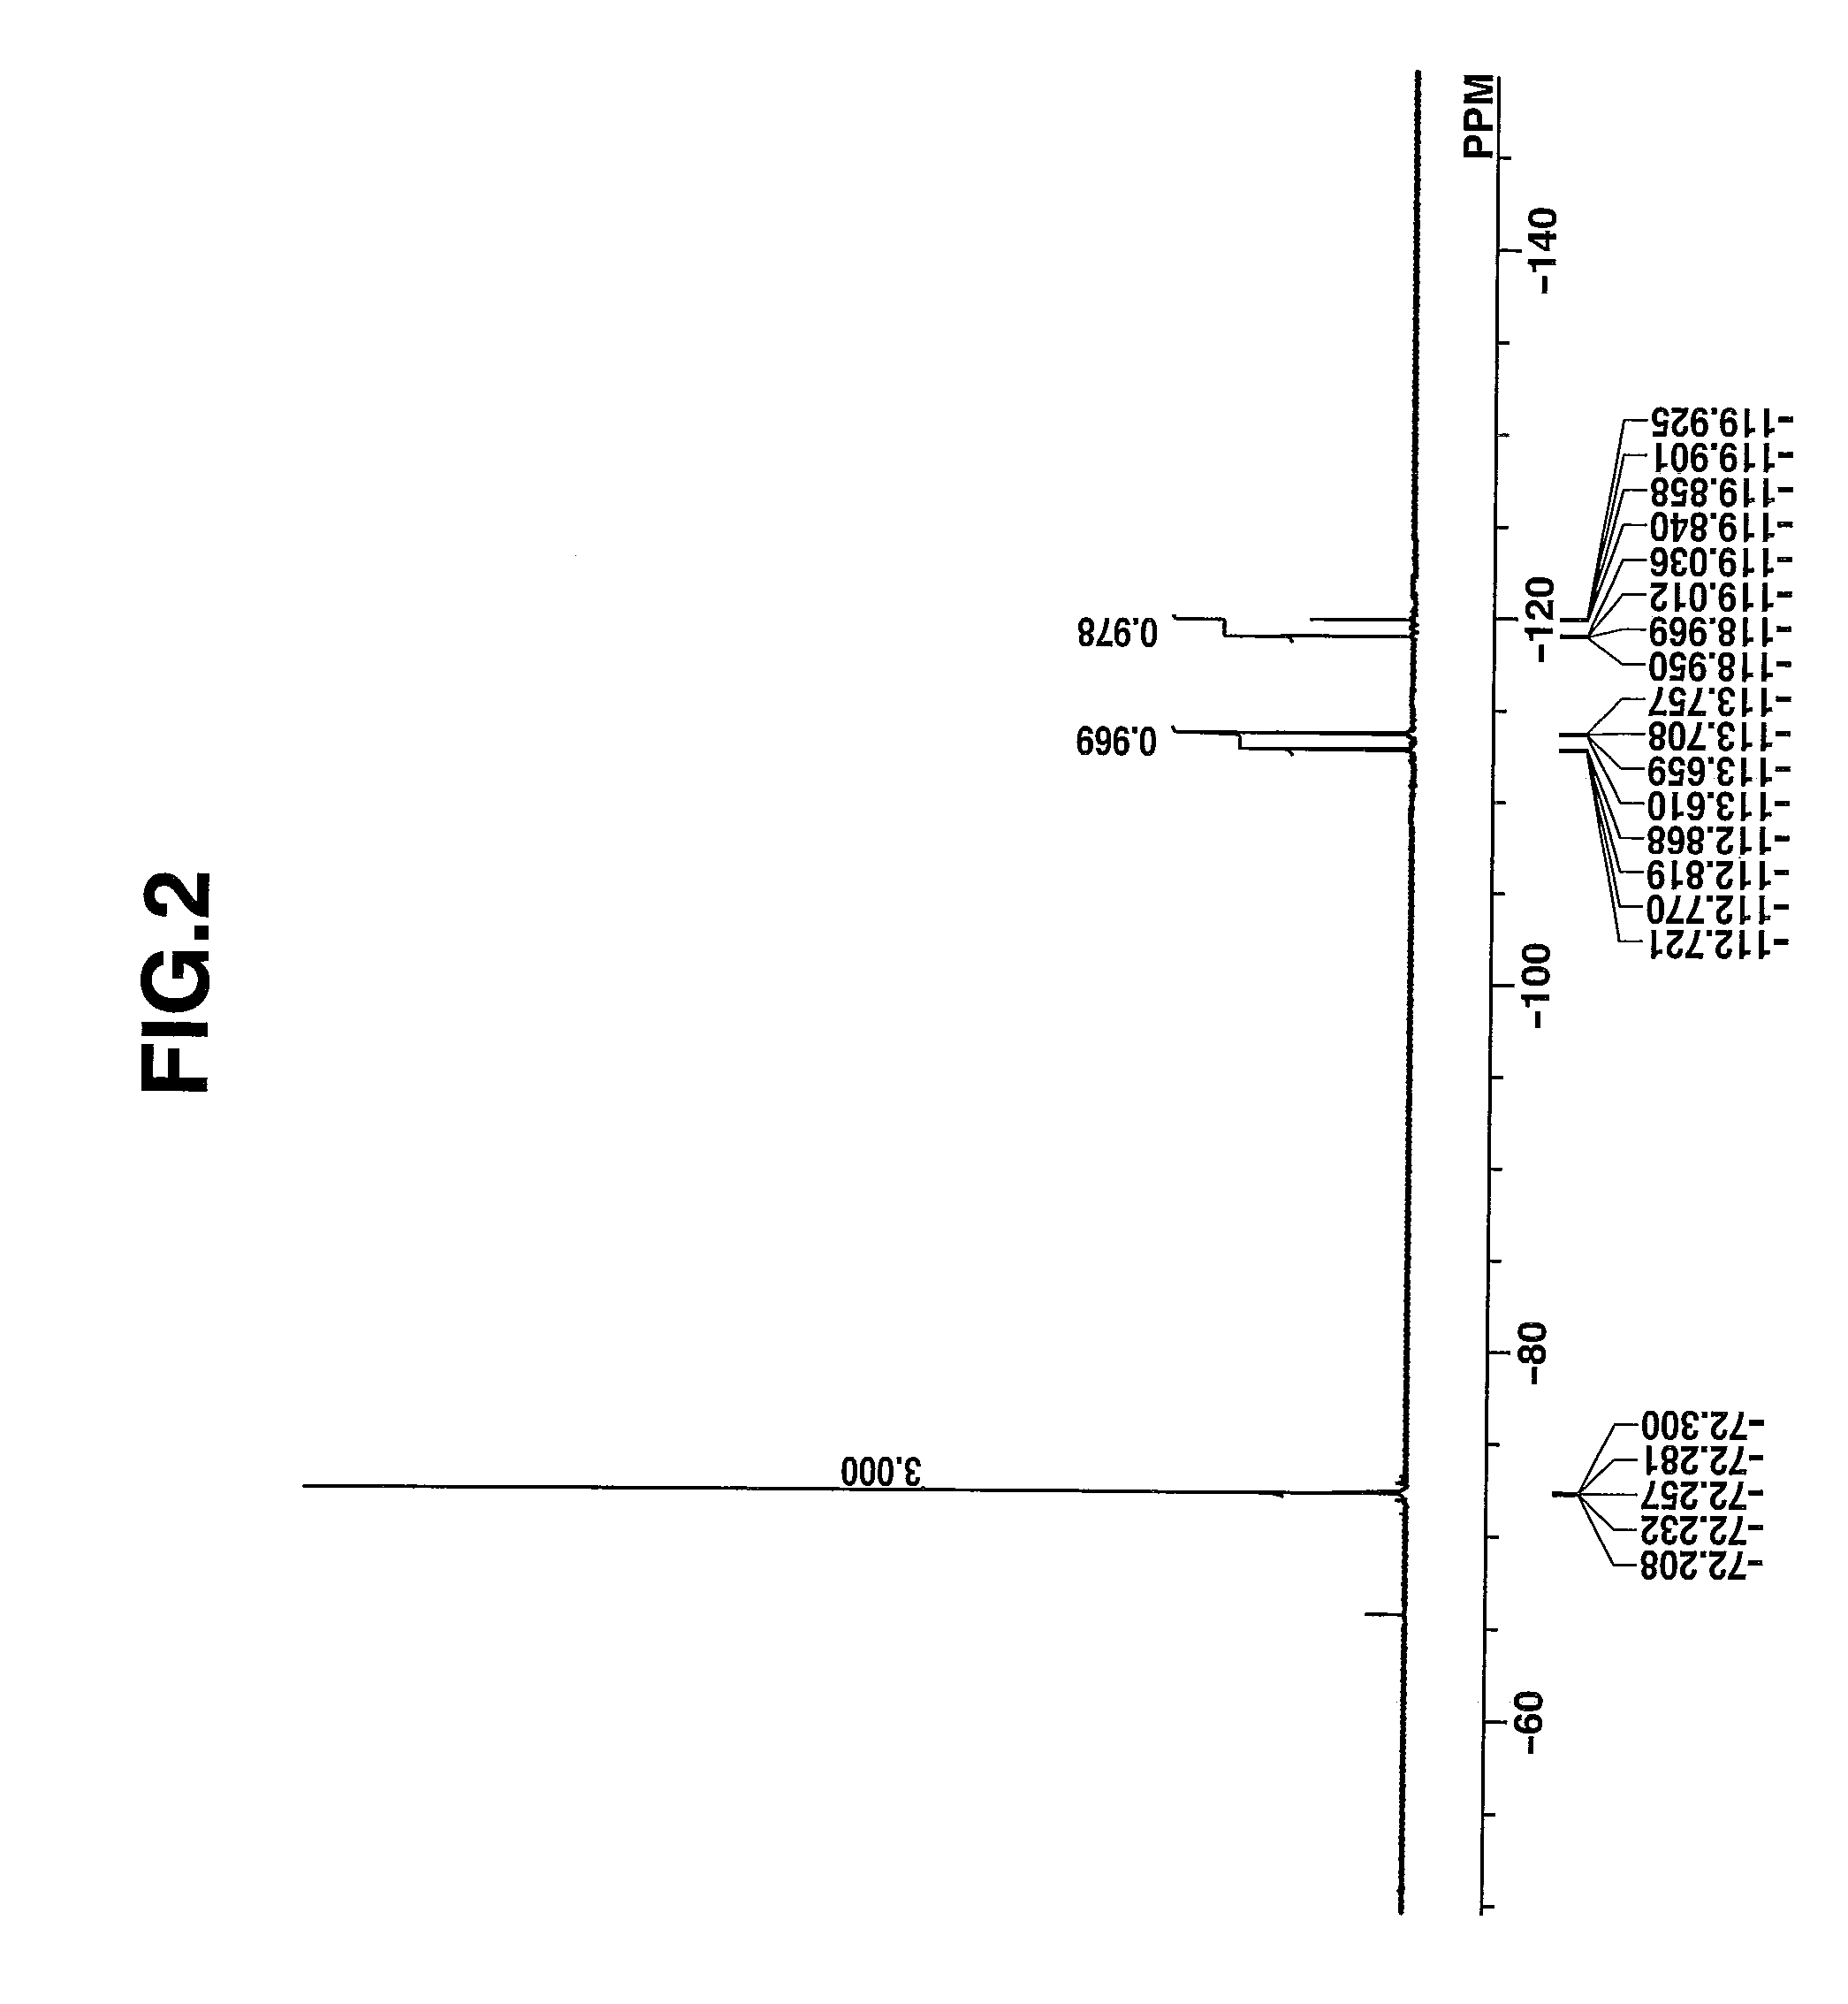 Near-infrared absorbing dye, near-infrared absorptive film-forming composition, and near-infrared absorptive film